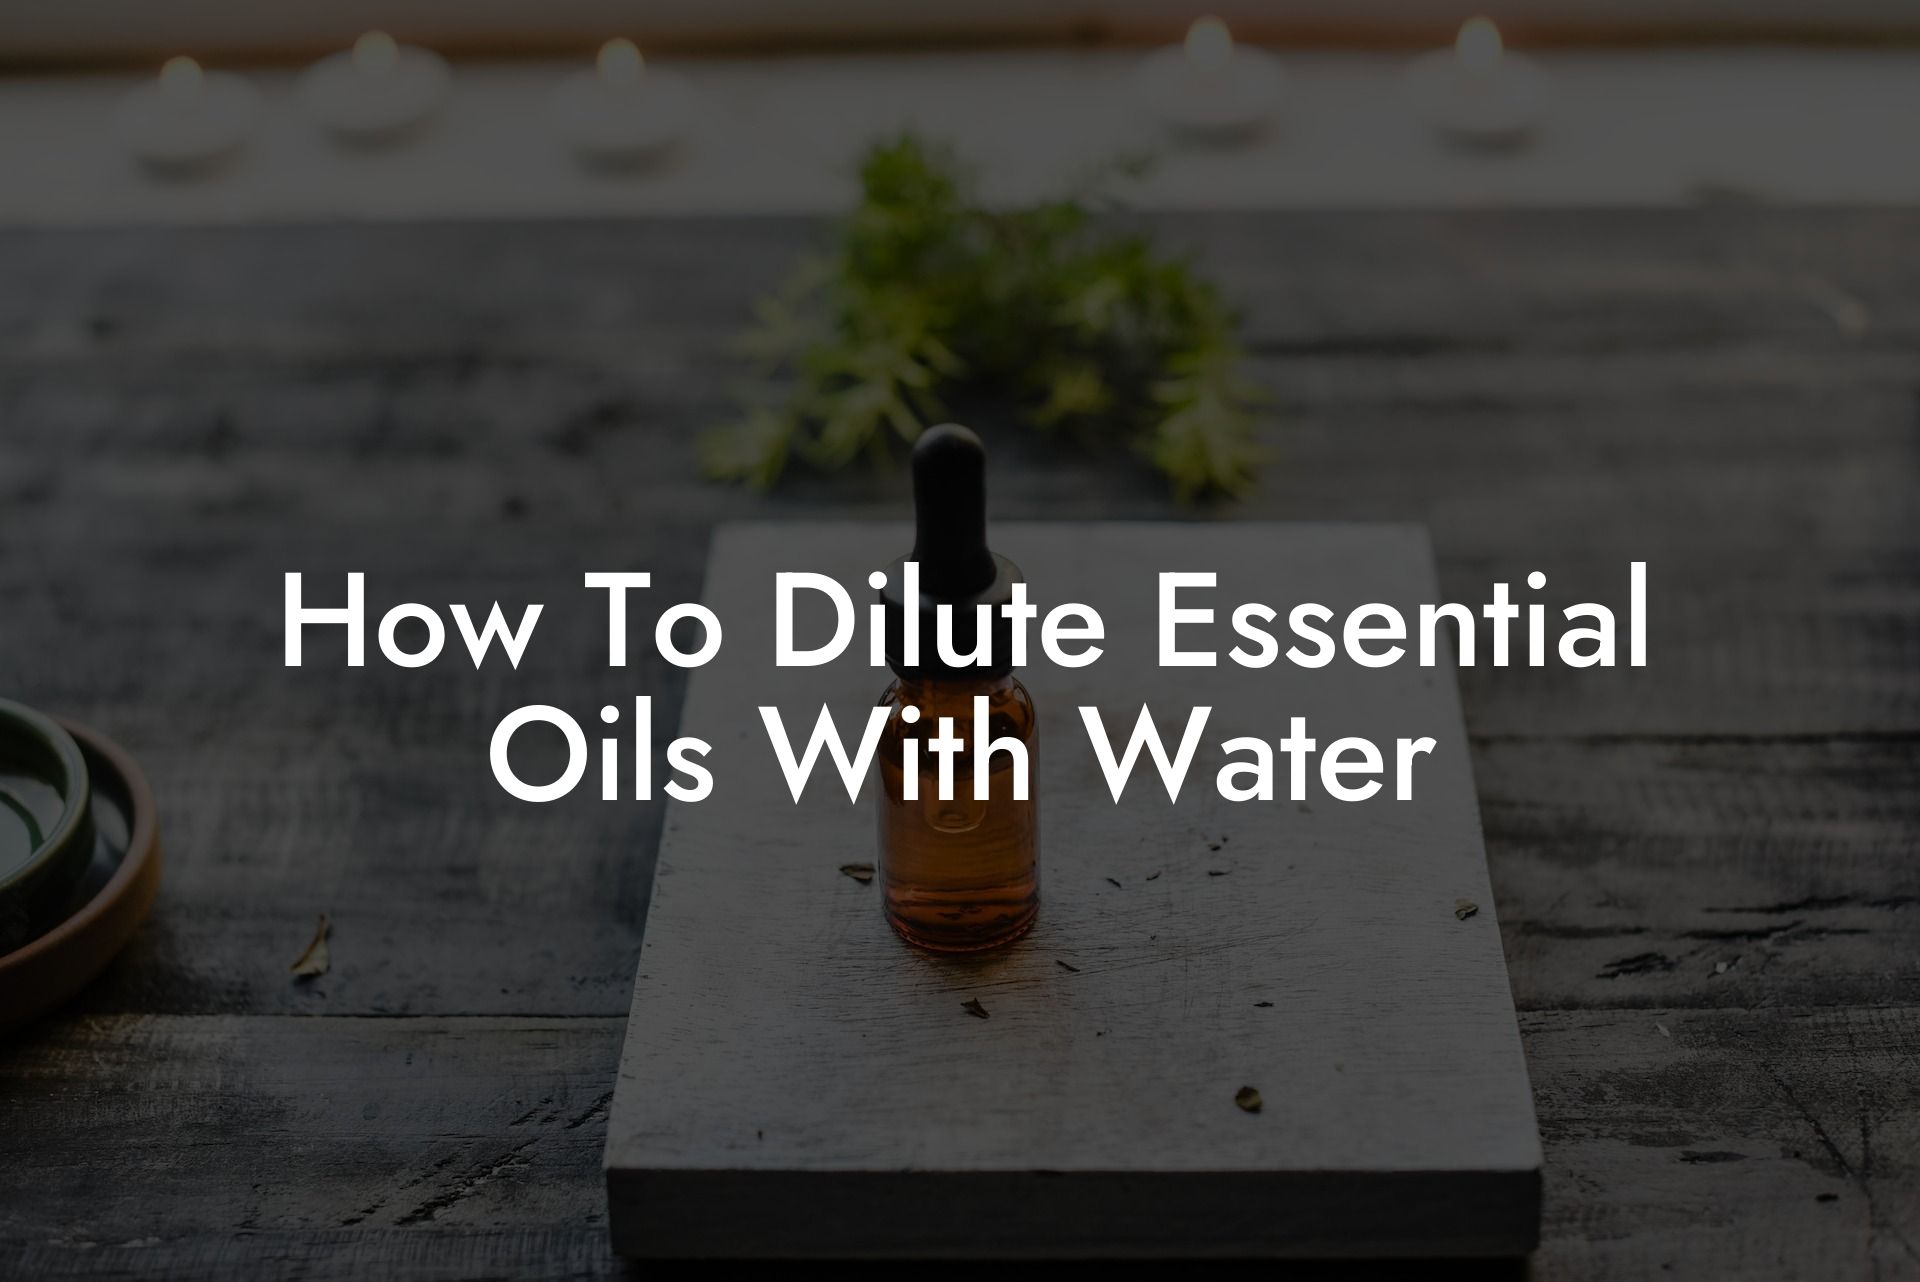 How To Dilute Essential Oils With Water